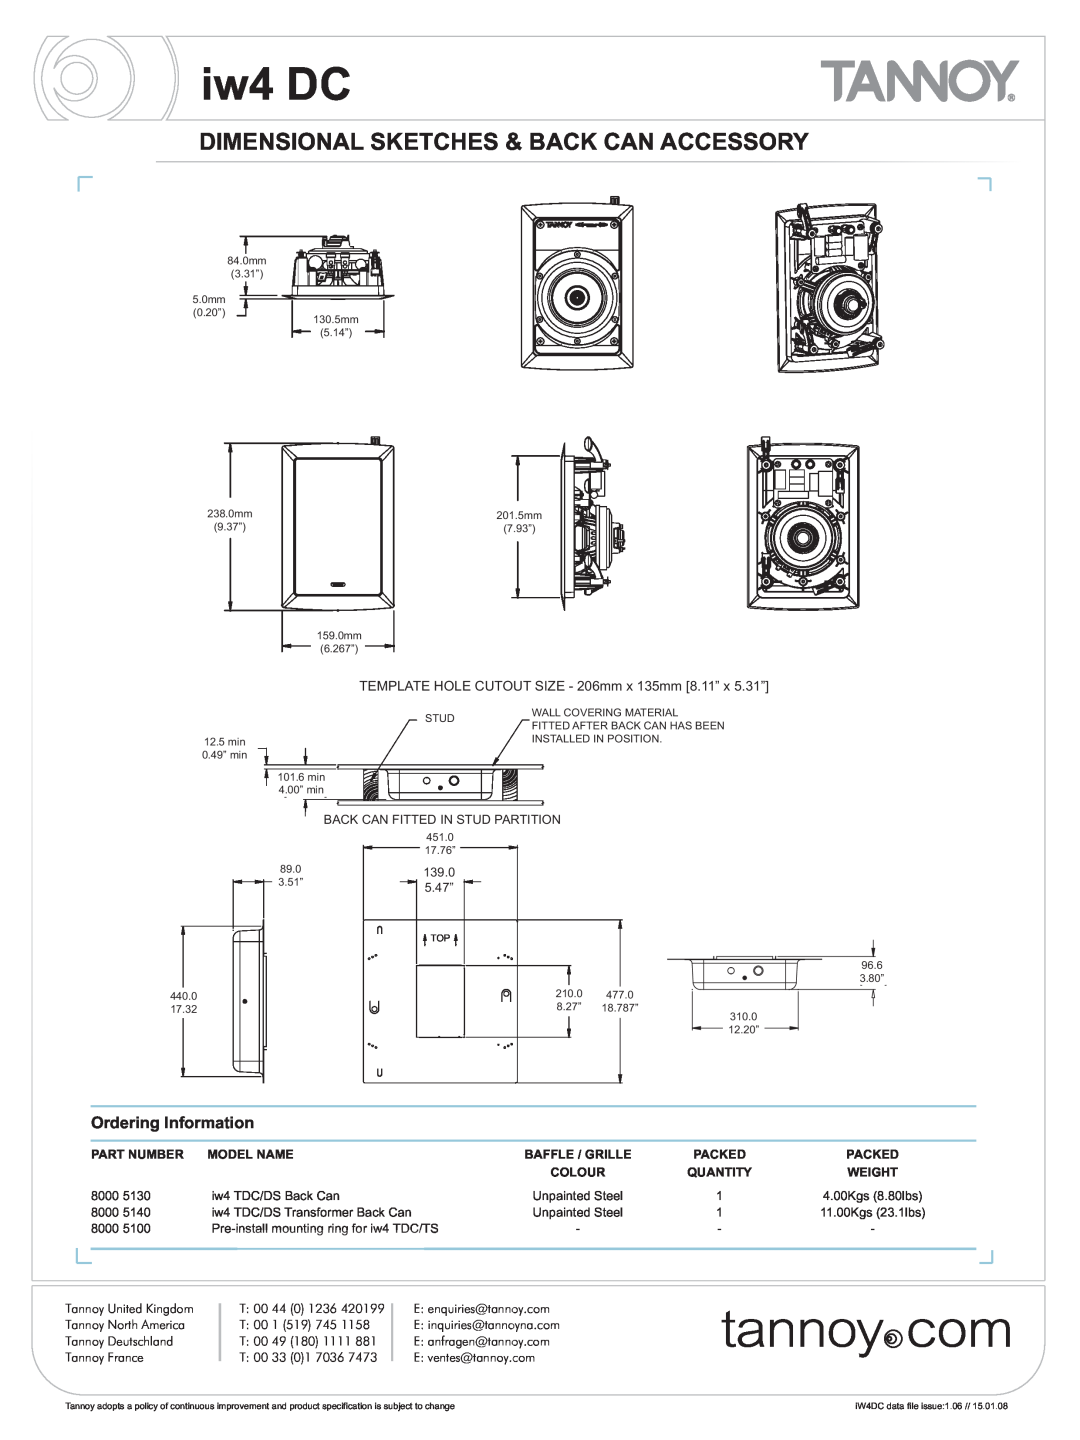 Tannoy iw4DC Dimensional Sketches & Back Can Accessory, iw4 DC, Ordering Information, Part Number, Model Name, Packed 